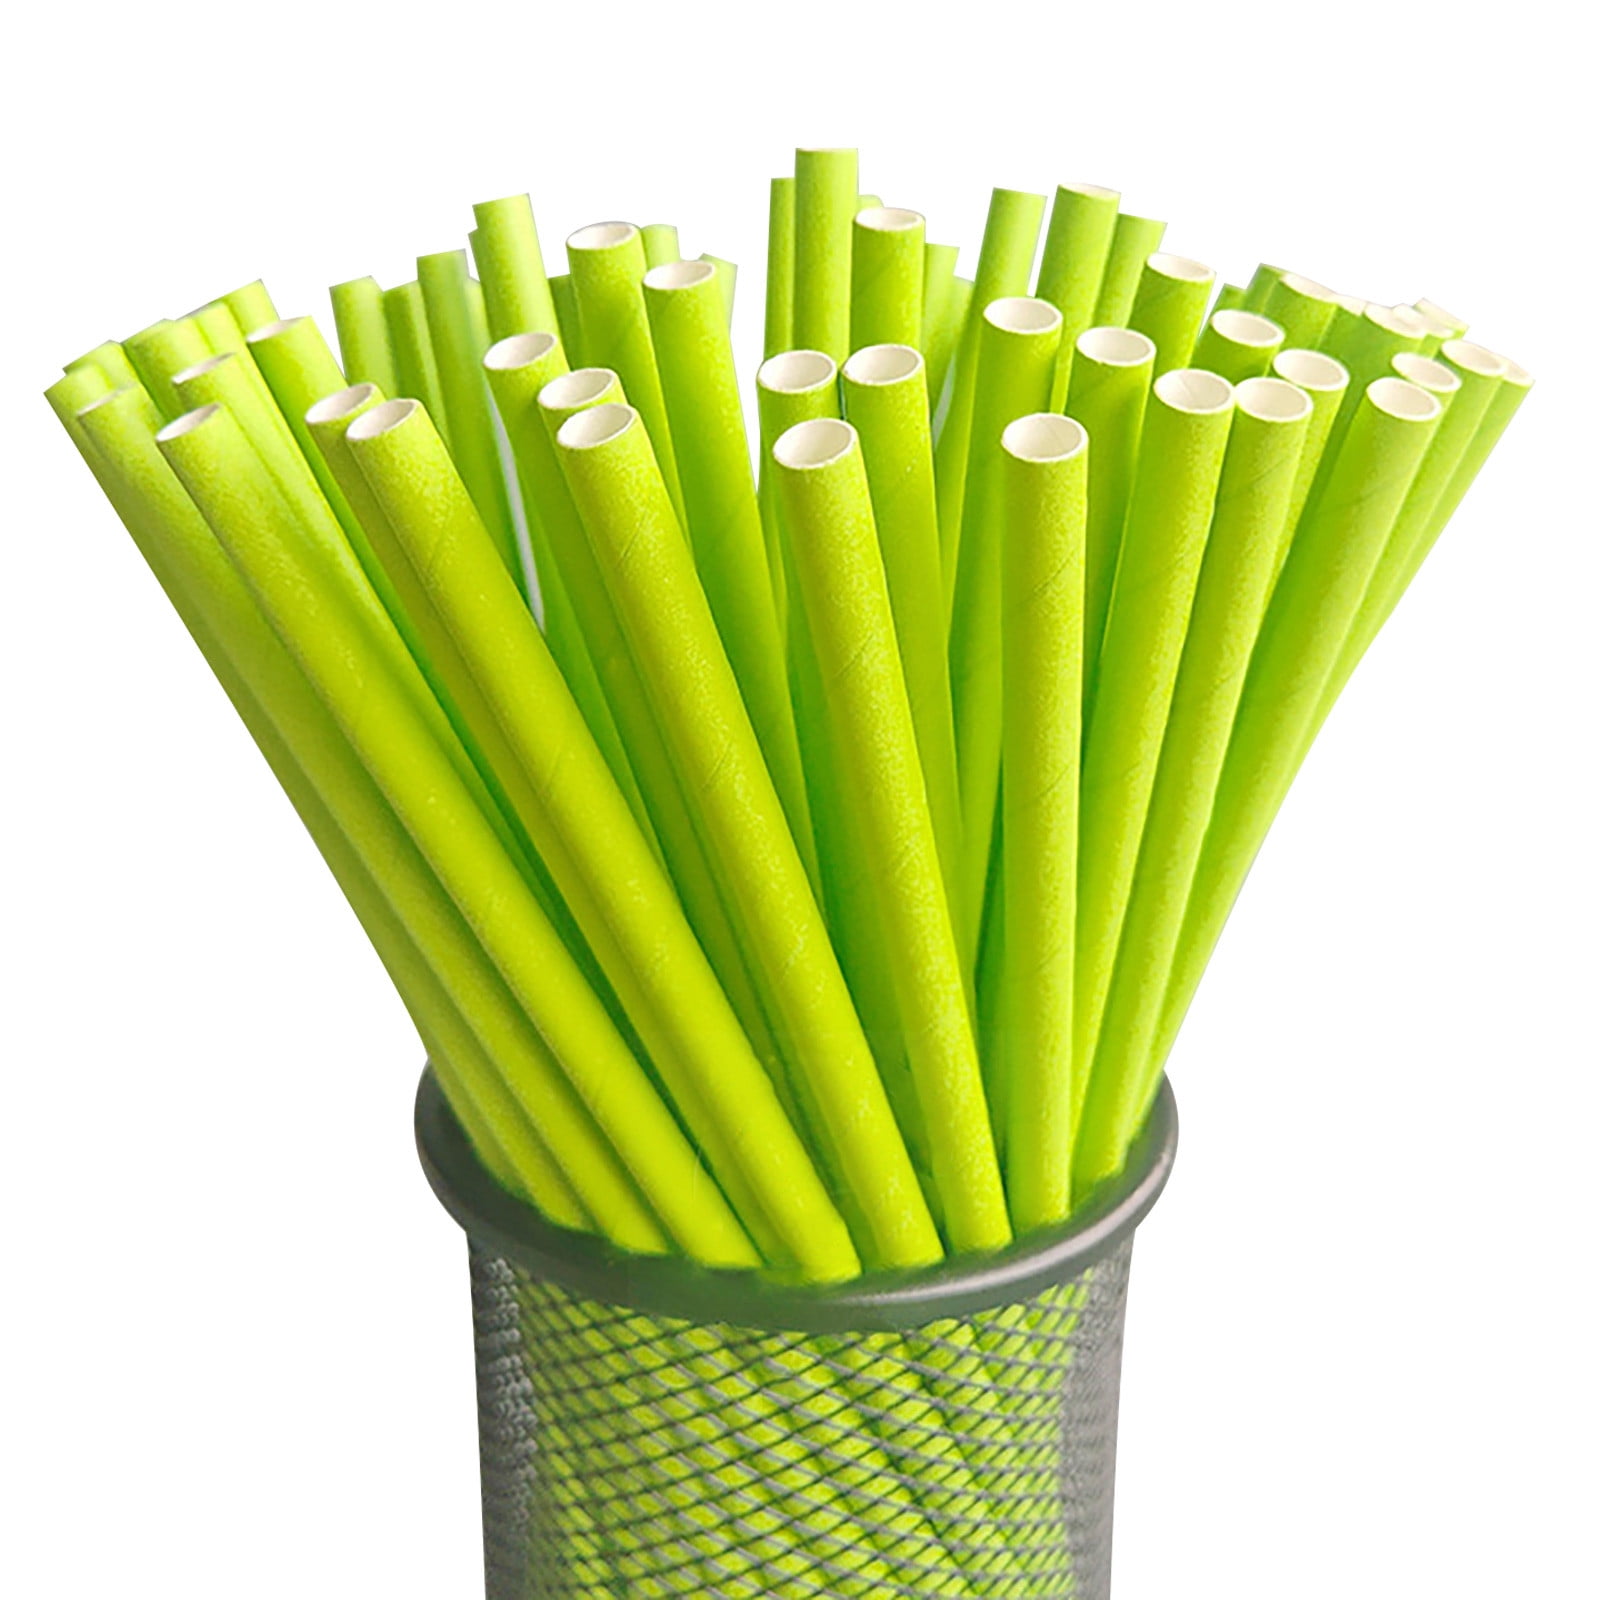 Reli. 400 Pack Paper Straws (Assorted Colors) | Paper Straws for Drinking - Disposable, Biodegradable/Eco-Friendly | Rainbow, Multi-Color Drinking